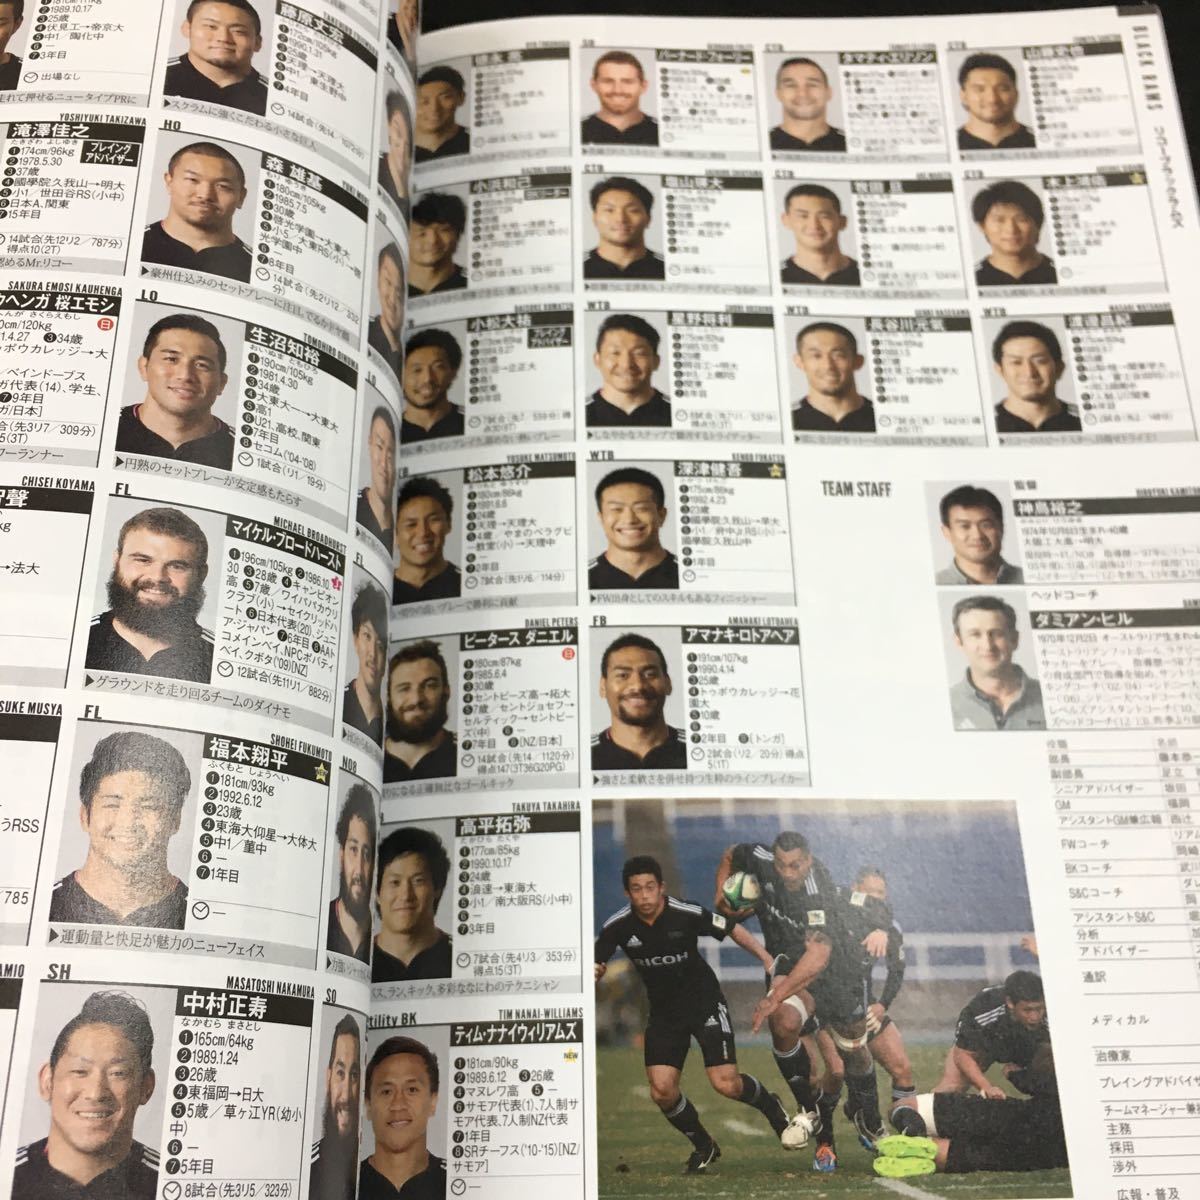 h-550 Japan rugby to pulley g2015-2016 official fan book Baseball * magazine company *6